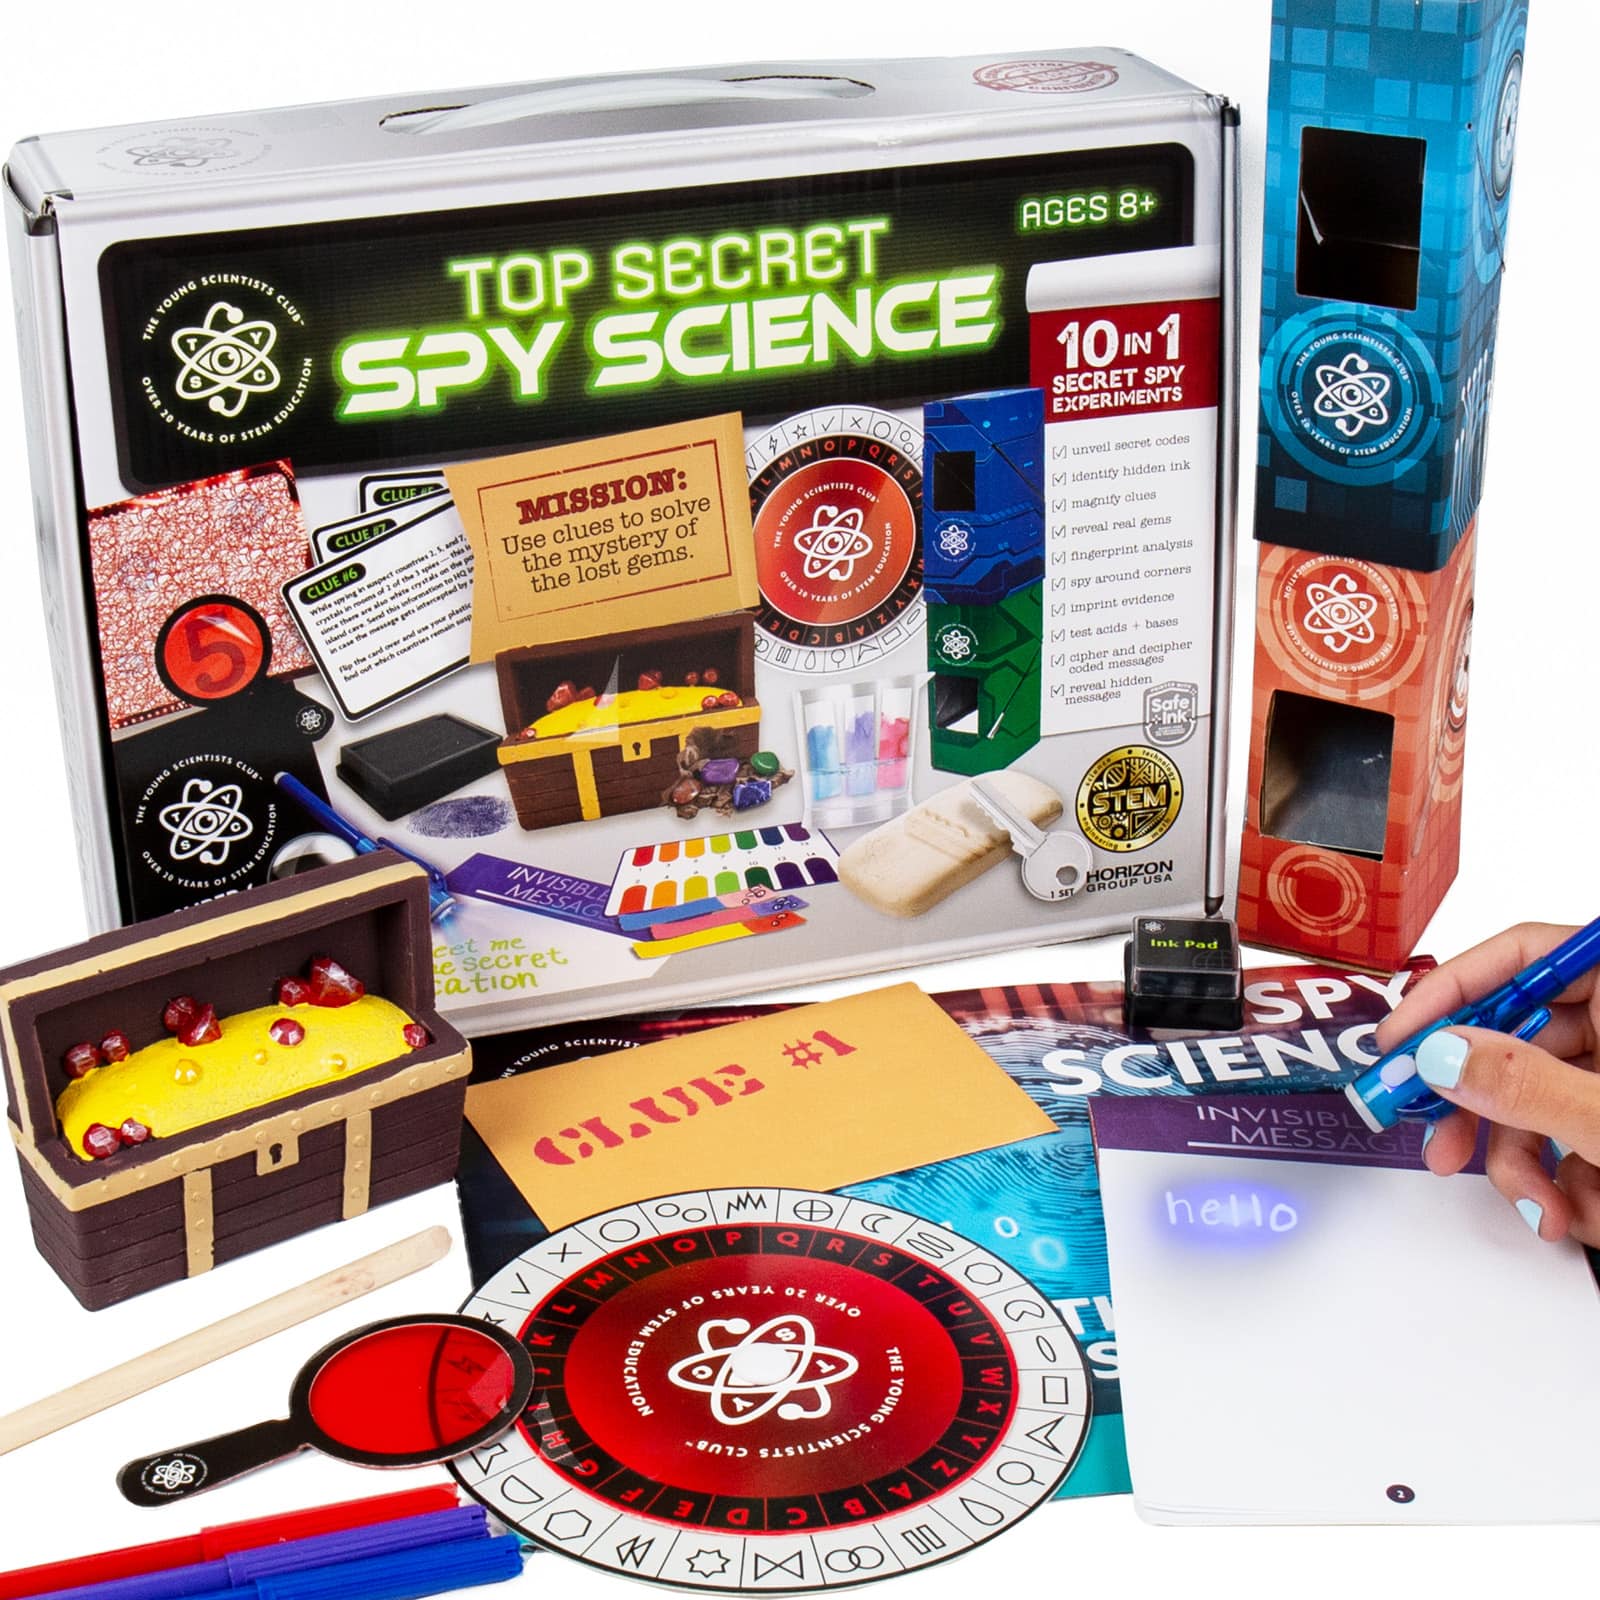 The Young Scientists Club Top Secret Spy Science Kit